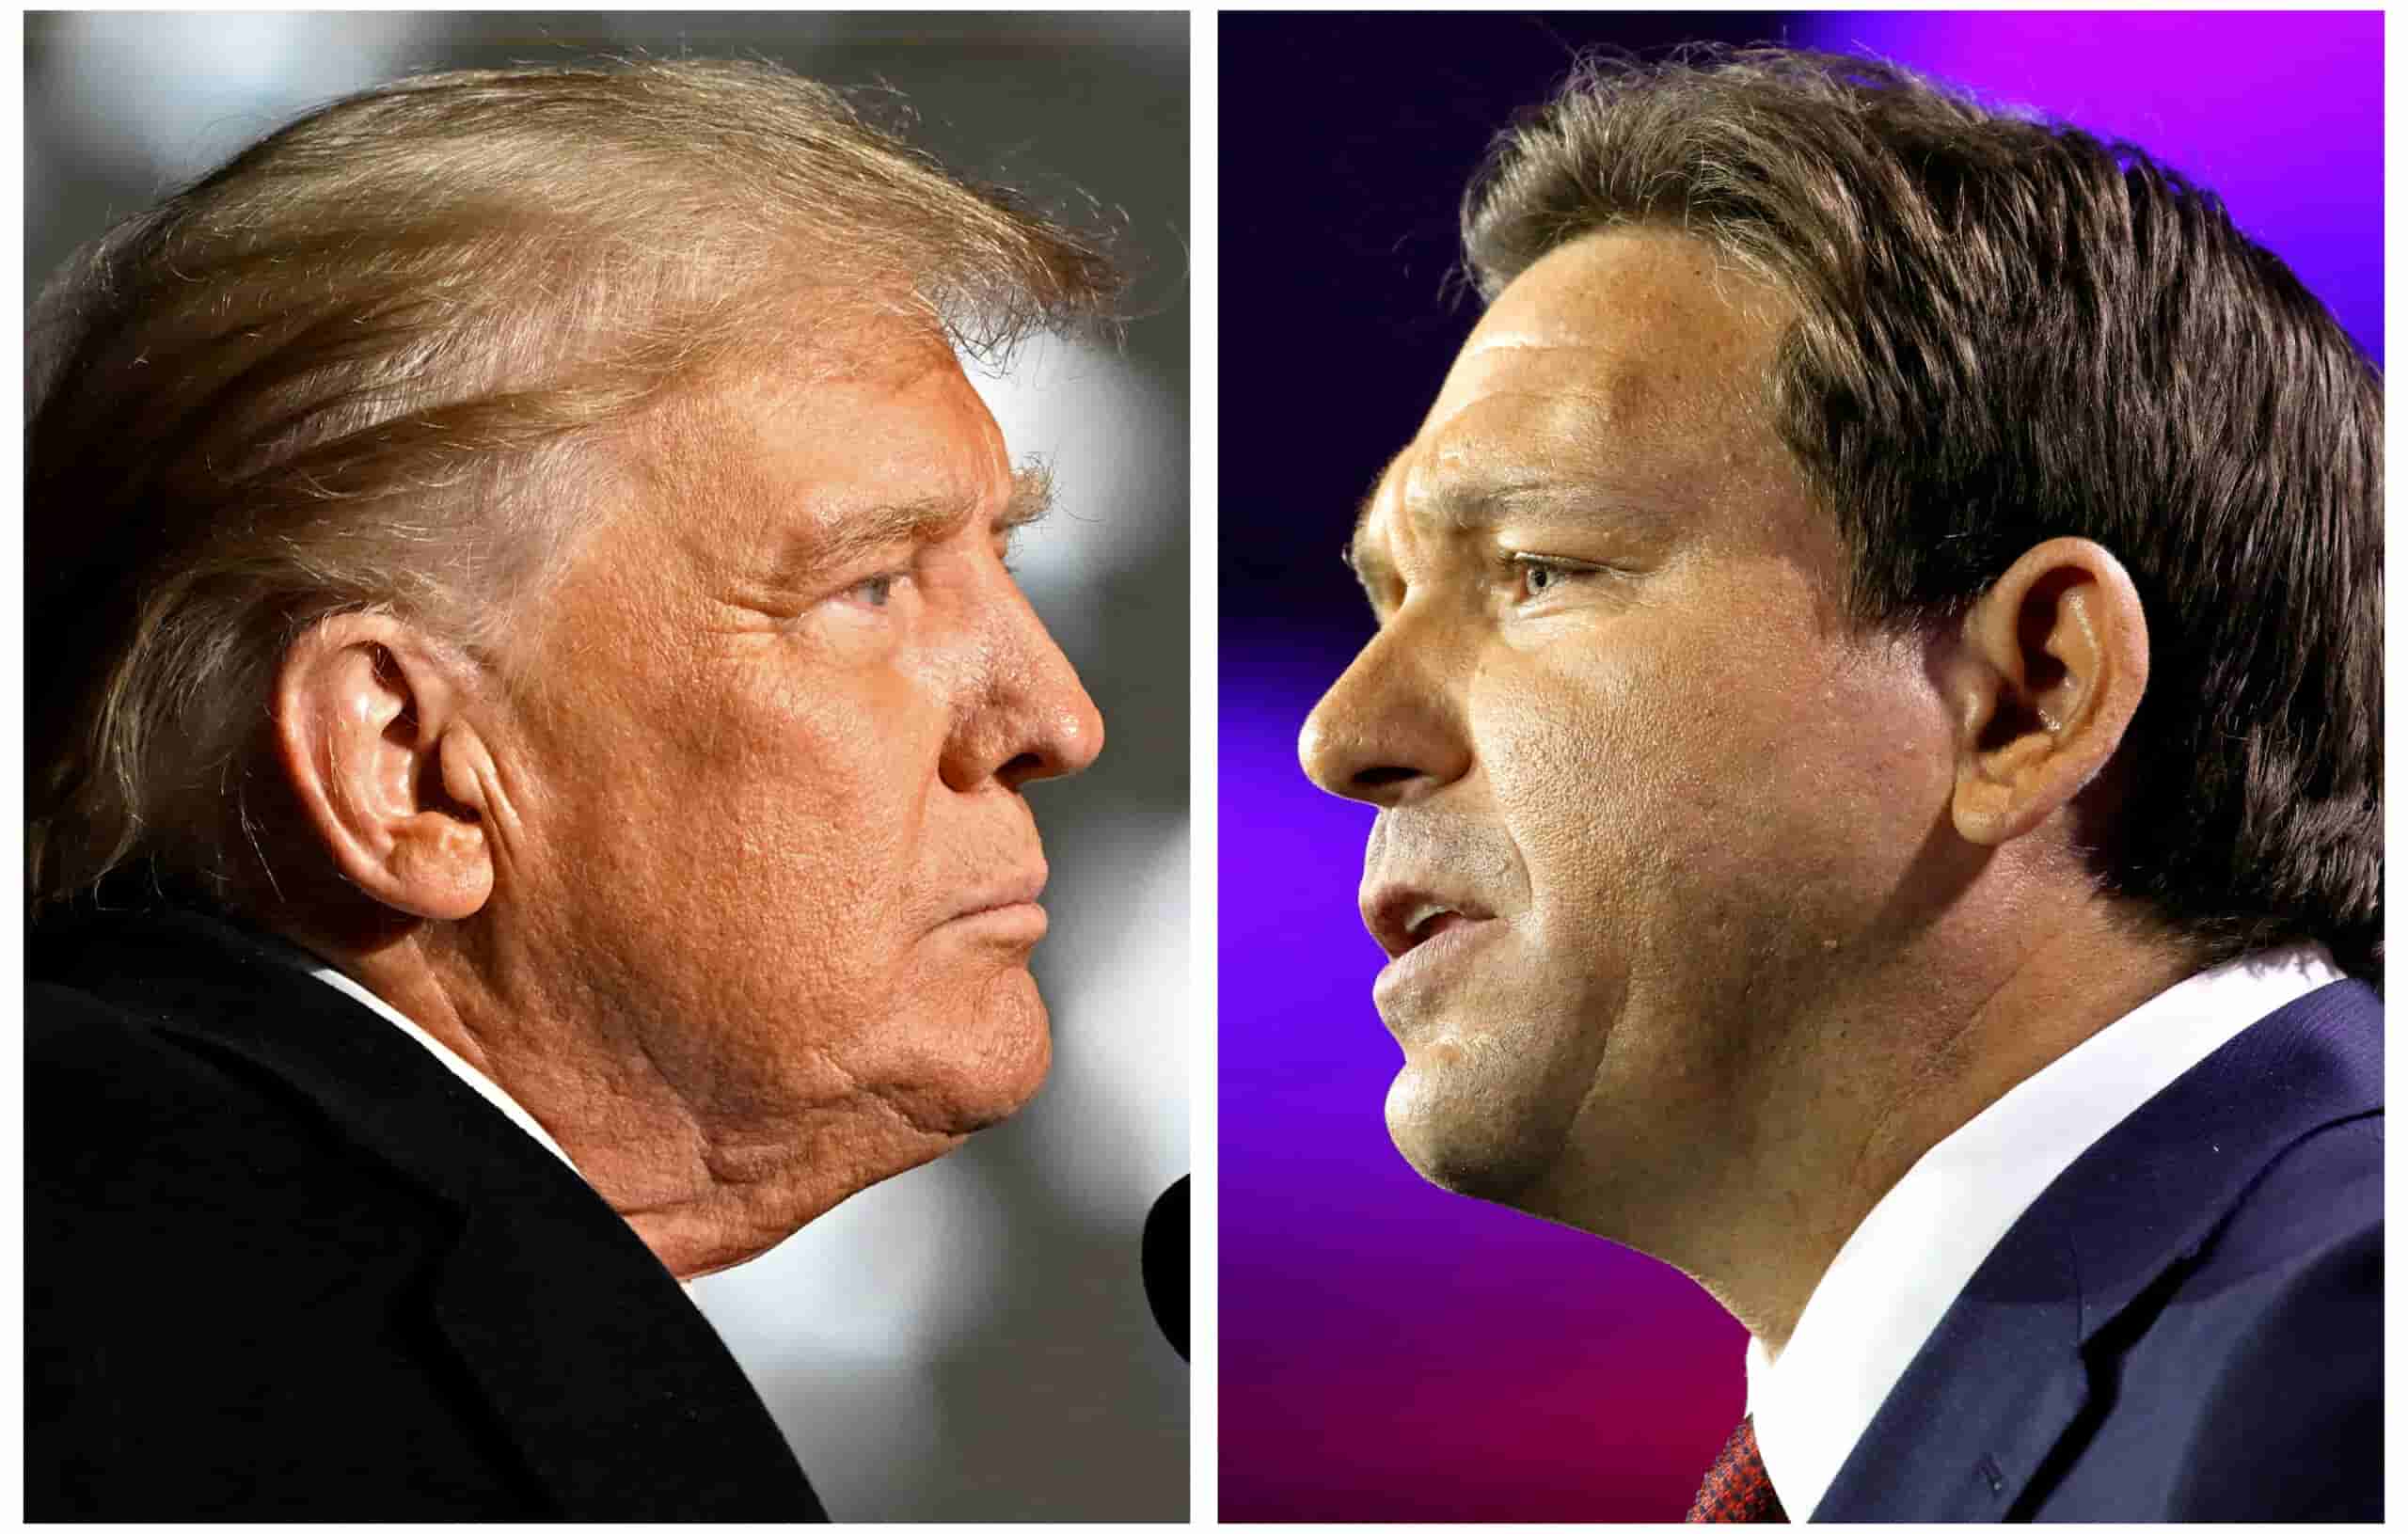 GOP voters pick DeSantis over Trump in hypothetical head-to-head matchup for 2024 presidential nomination, poll shows